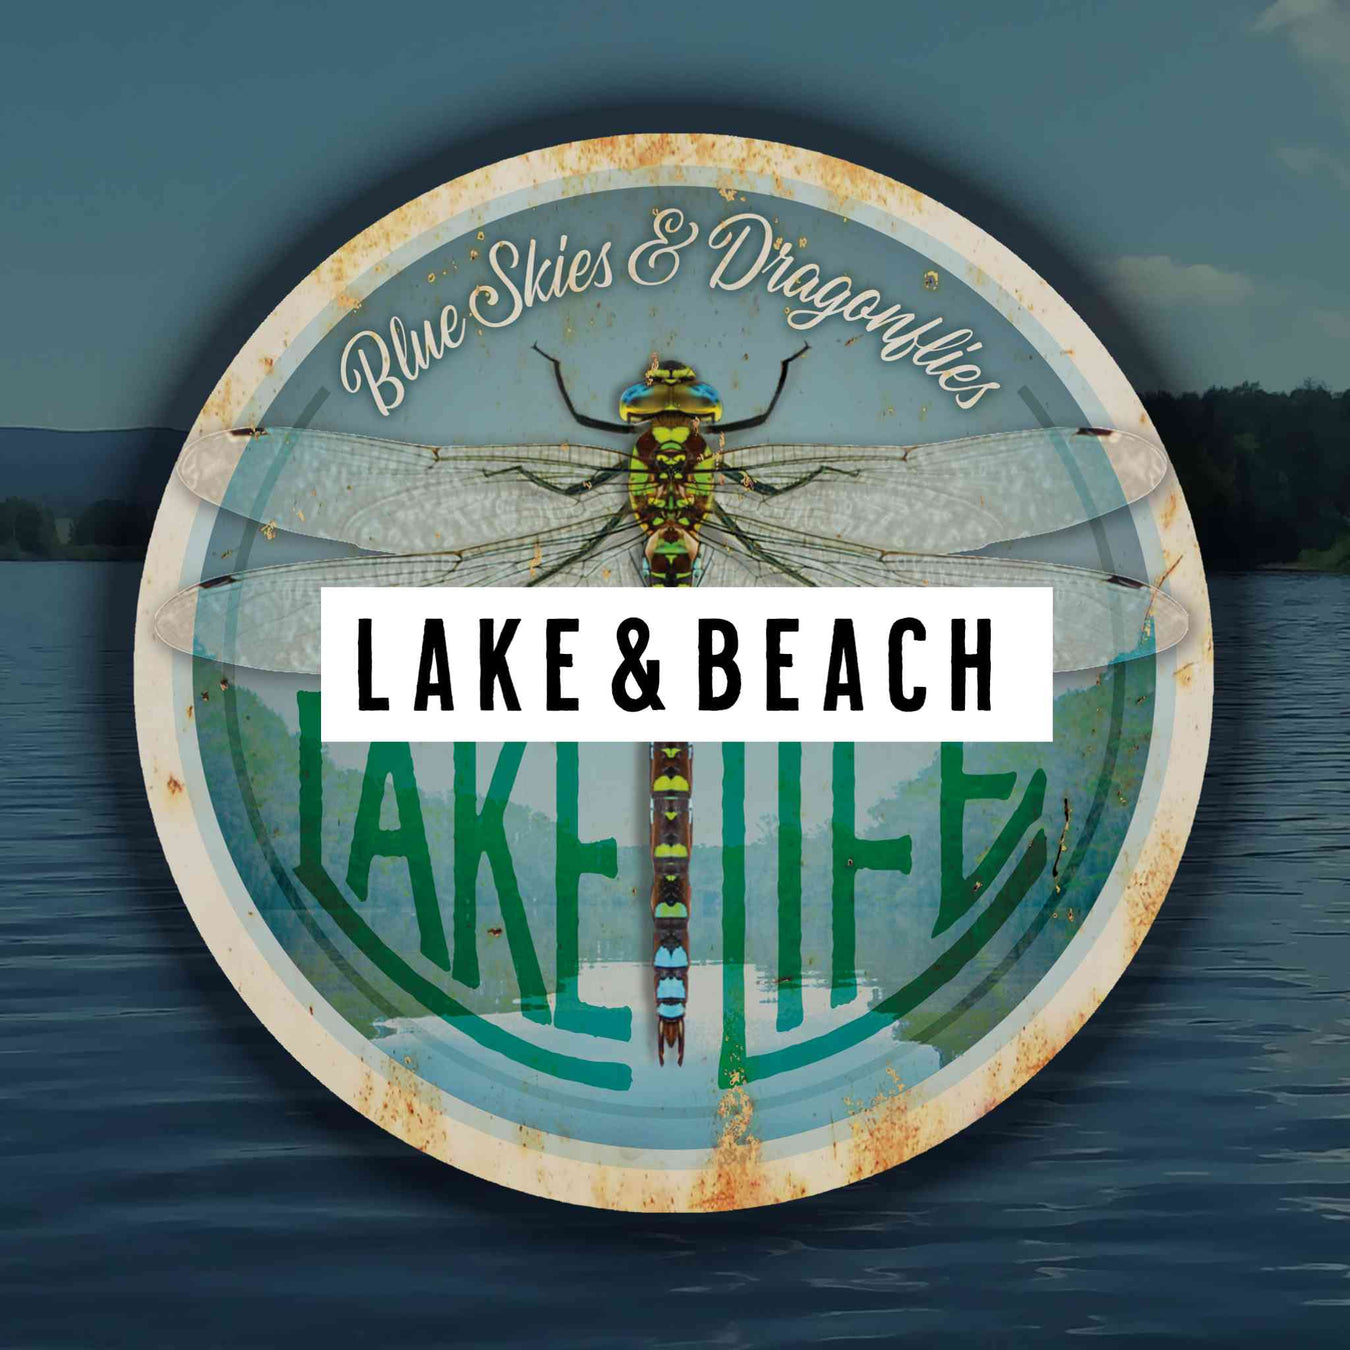 One of Sunshine Corner's Lake and Beach Signs, "Blue Skies and Dragonflies" with a banner labeled "Lake & Beach" on the top with a dark overlay.